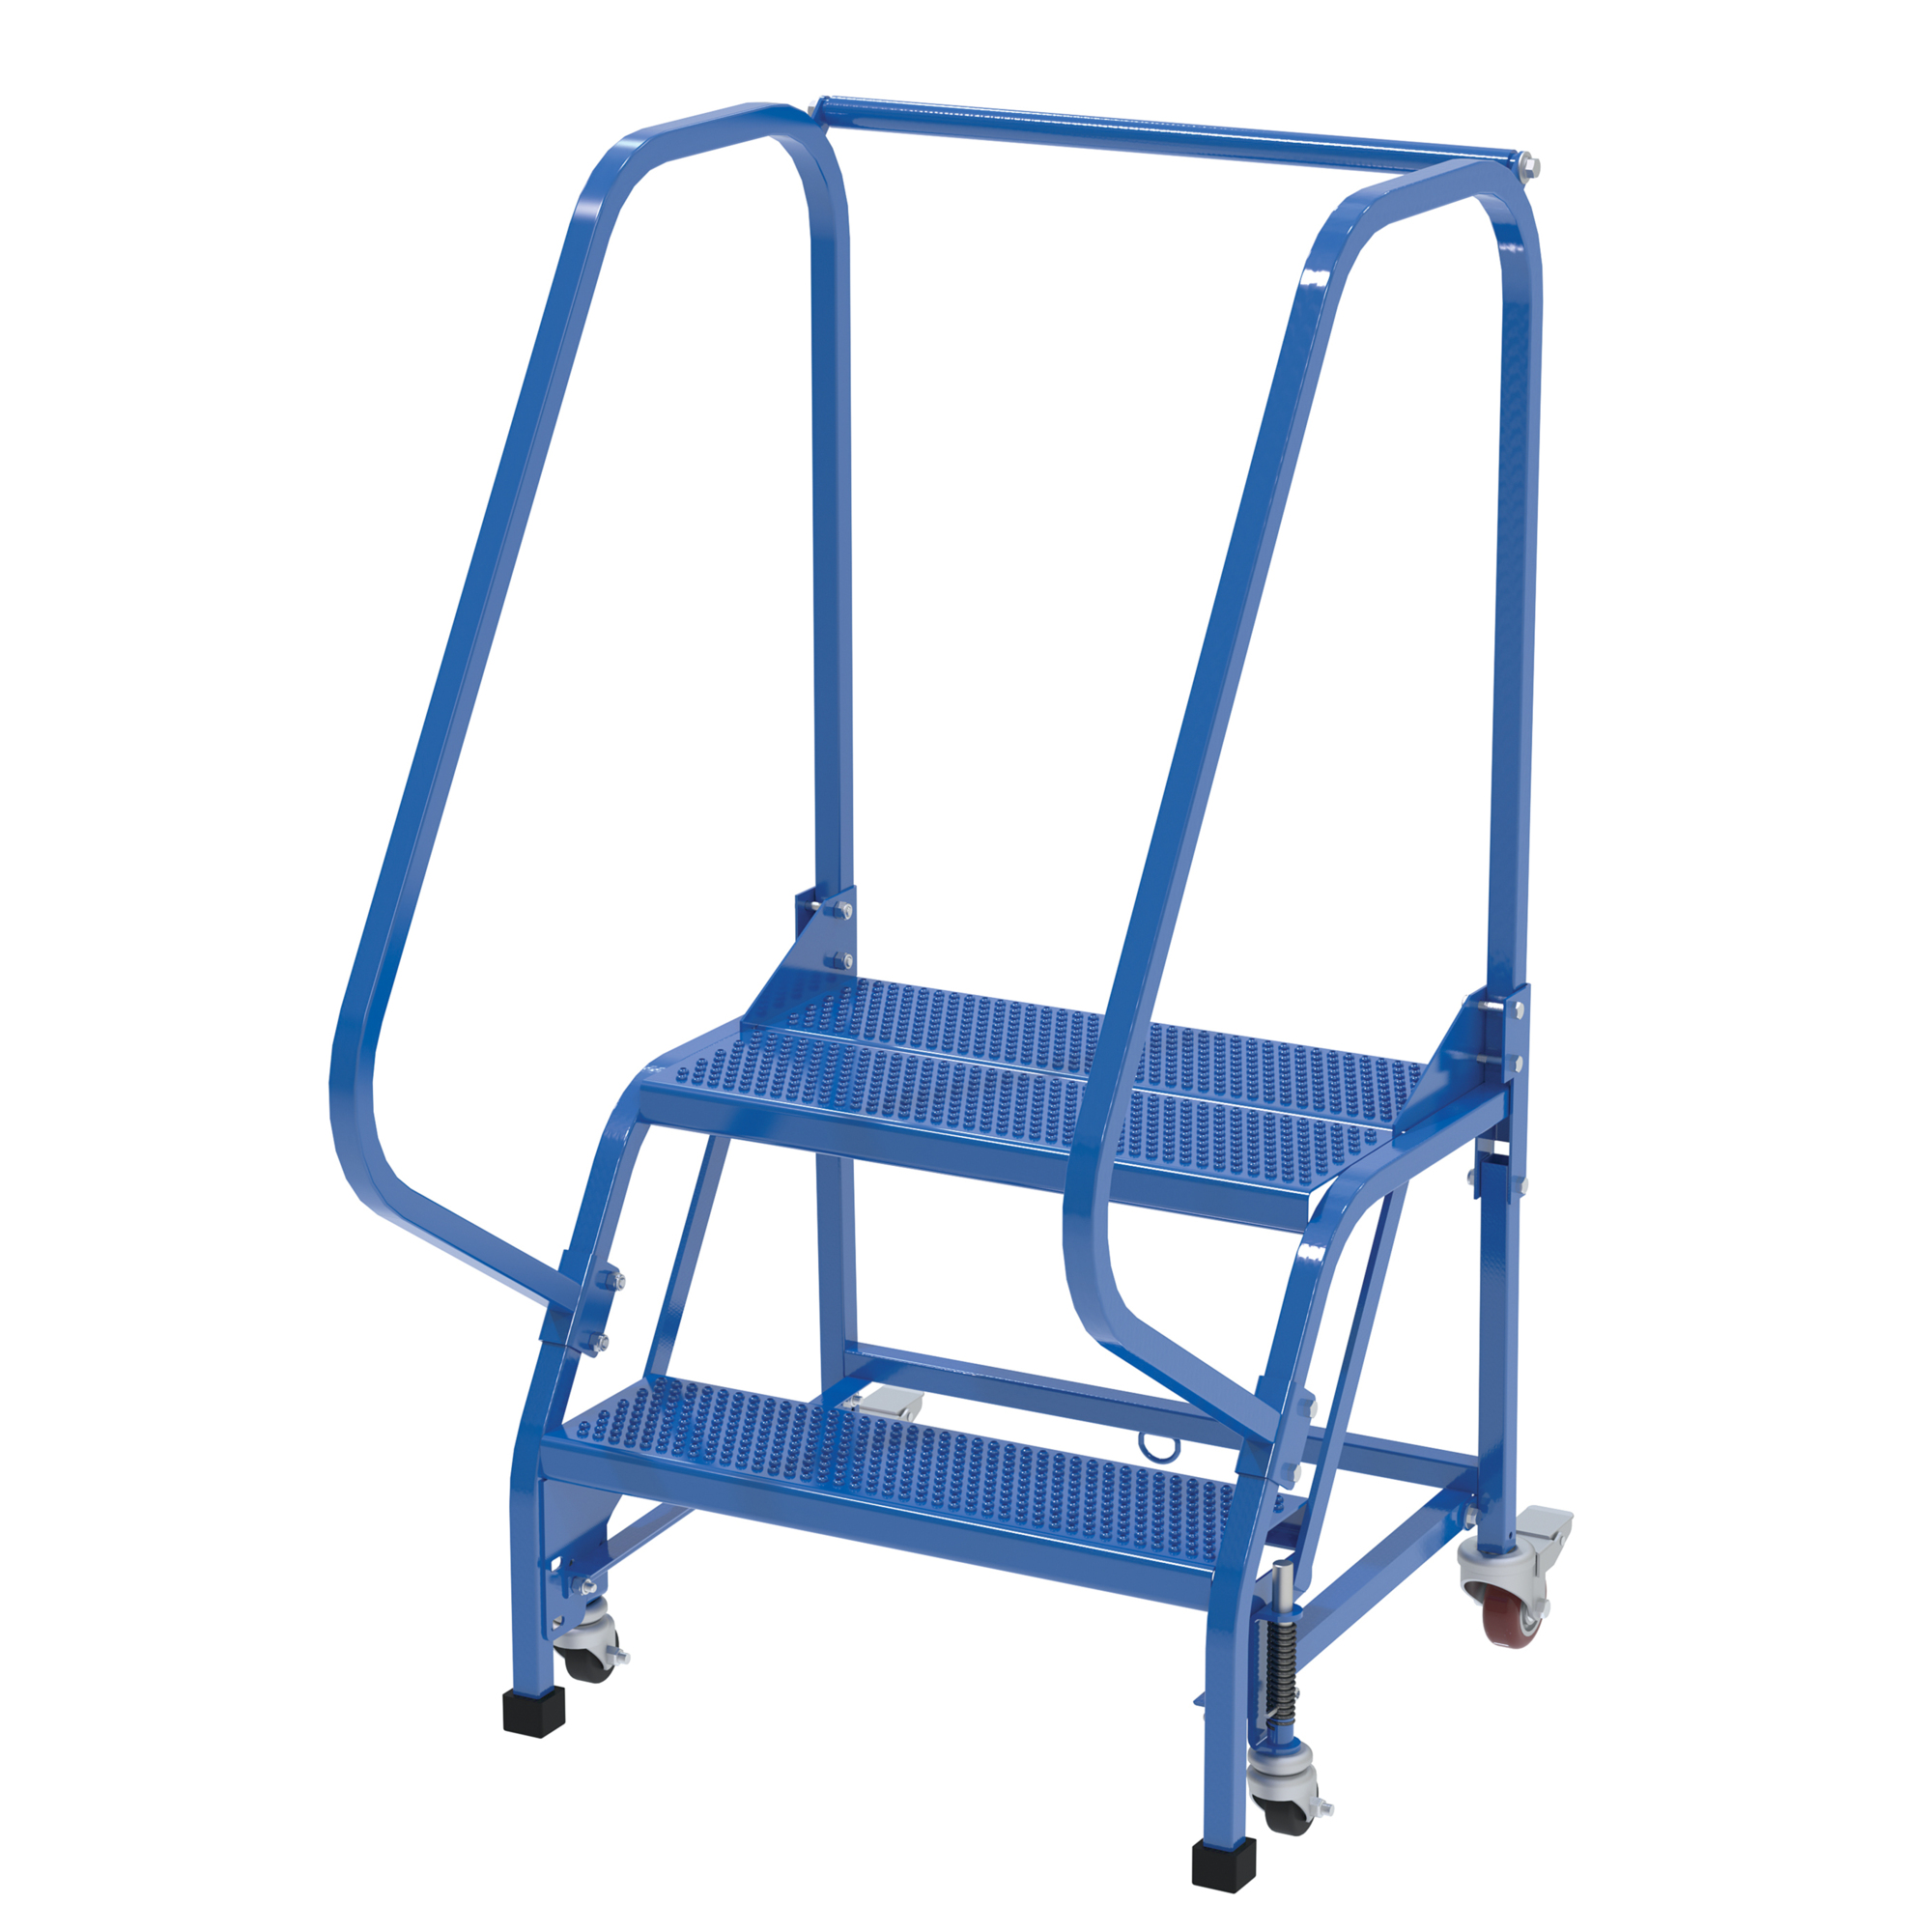 Vestil, 2 Step perforated warehouse ladder, Overall Height 50 in, Steps 2 Material Steel, Model LAD-PW-26-2-P